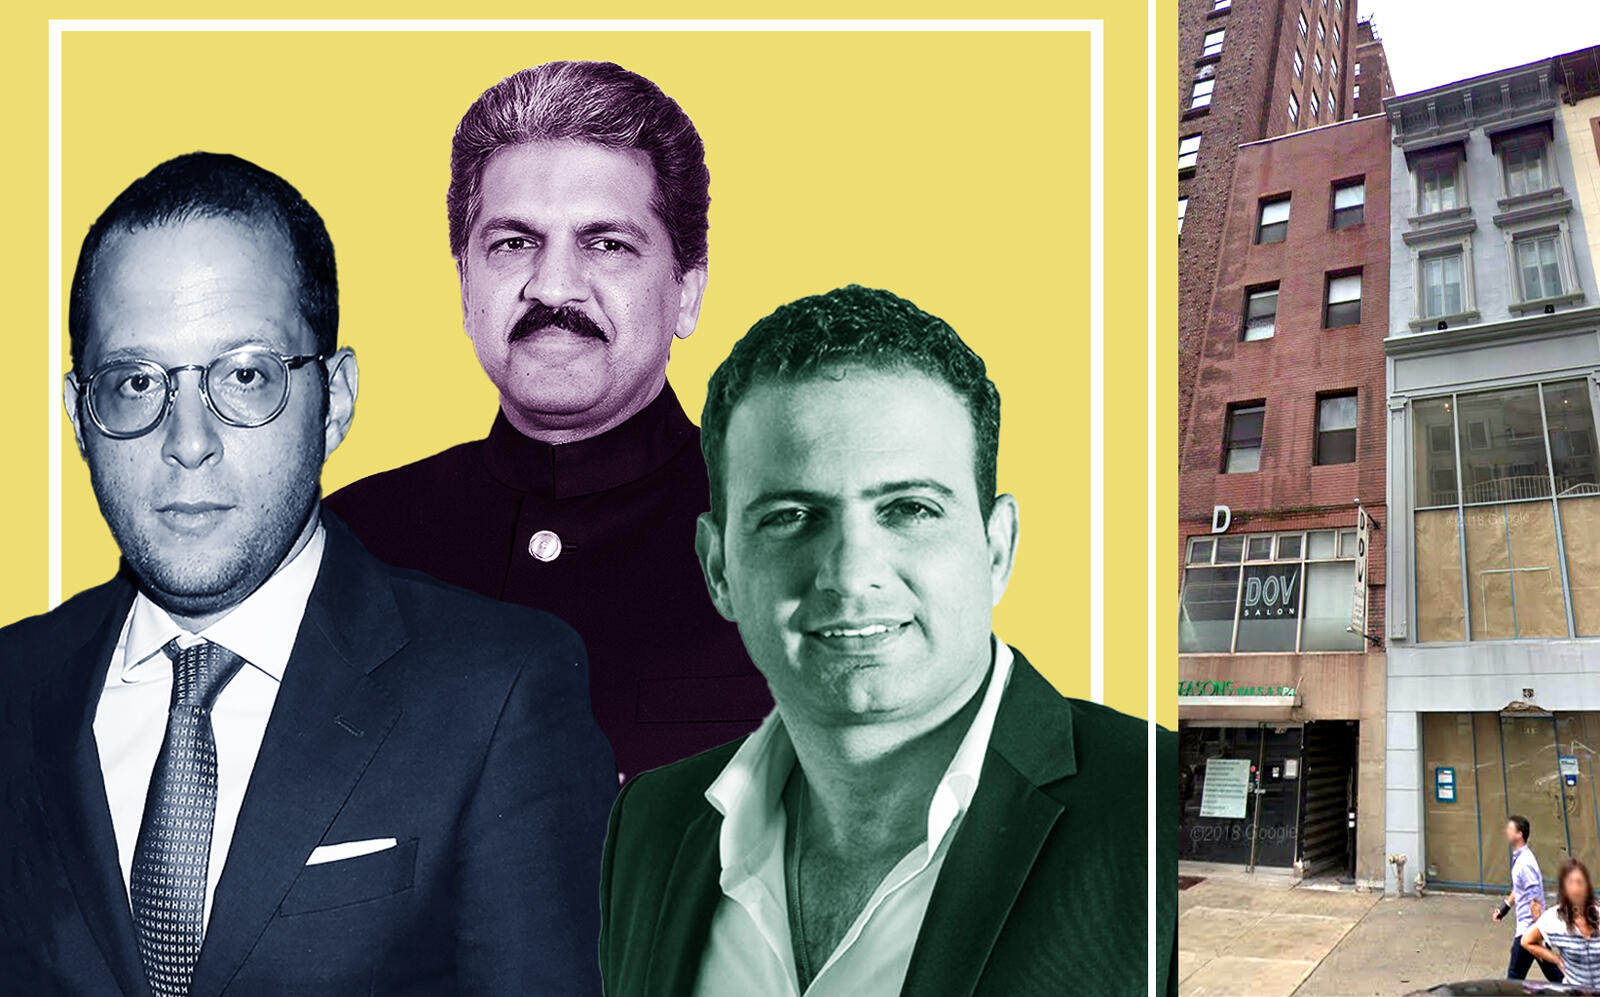 From left: Rotem Rosen of MRR Development, Anand Mahindra of Mahindra Group, Zahi Hagag of Hagag Group, and 126 East 57th Street (Credit: Getty Images, Google Maps)